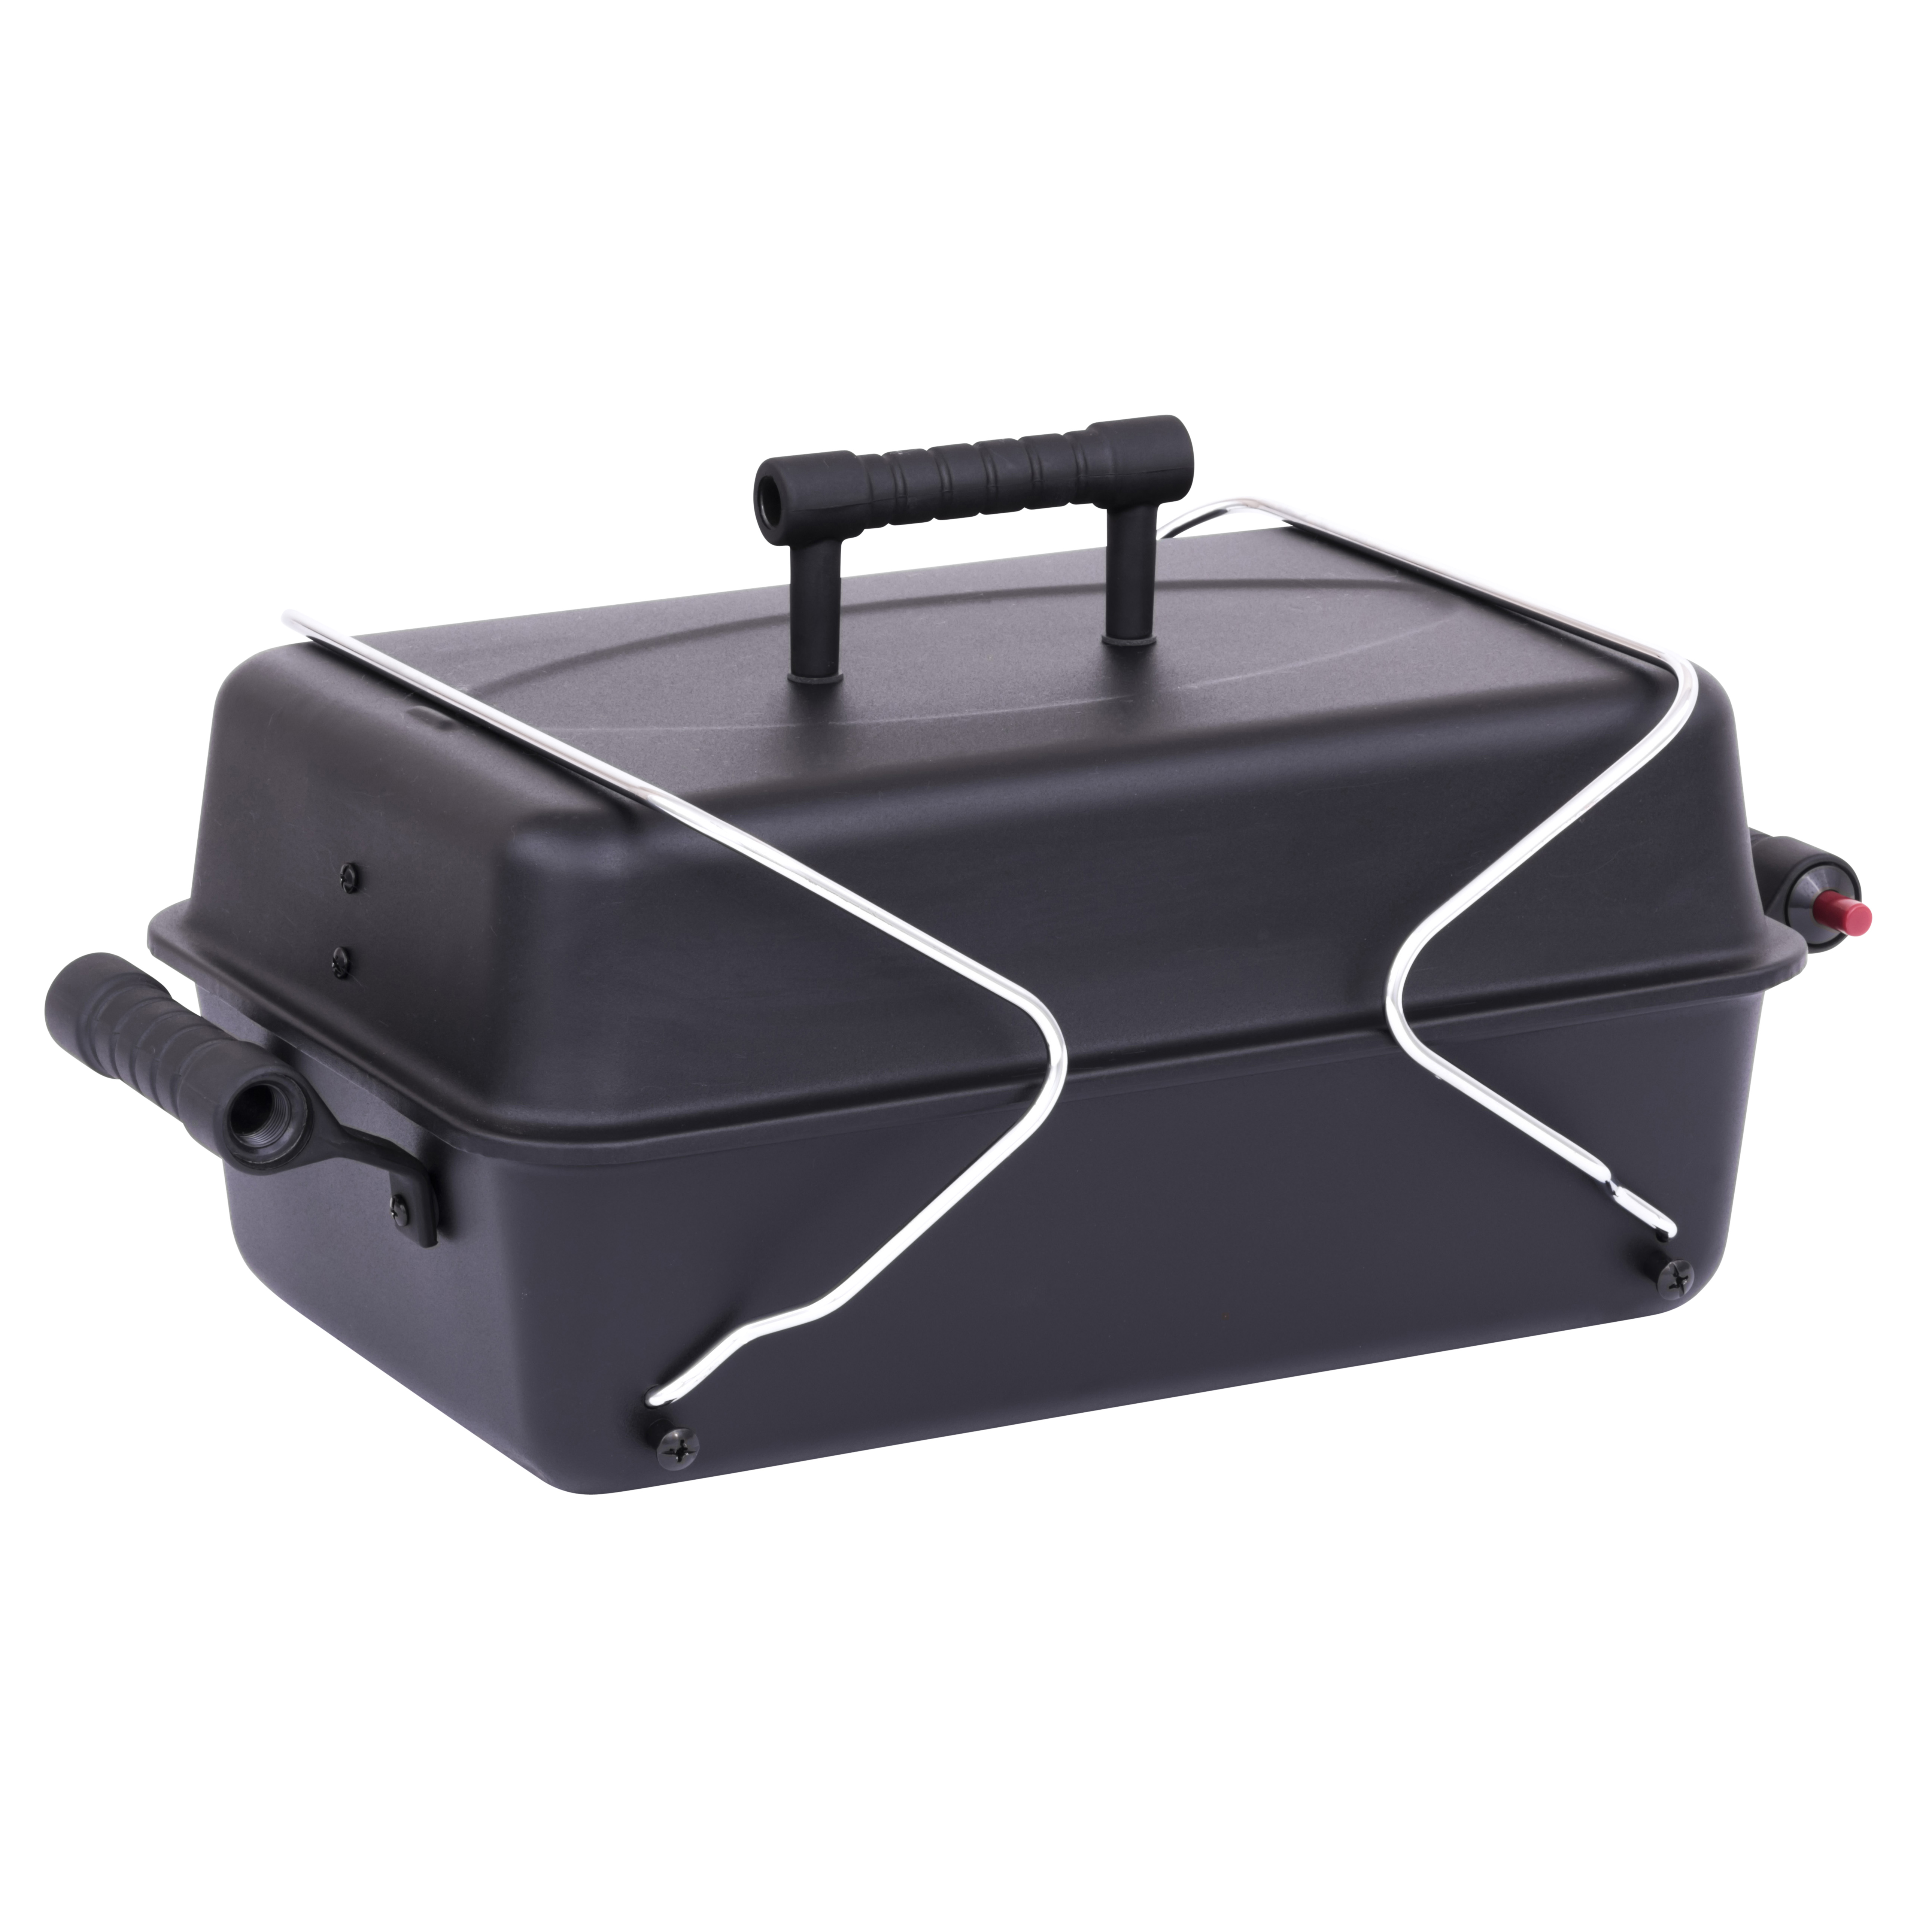 Char-Broil Portable Gas Grill - image 2 of 12